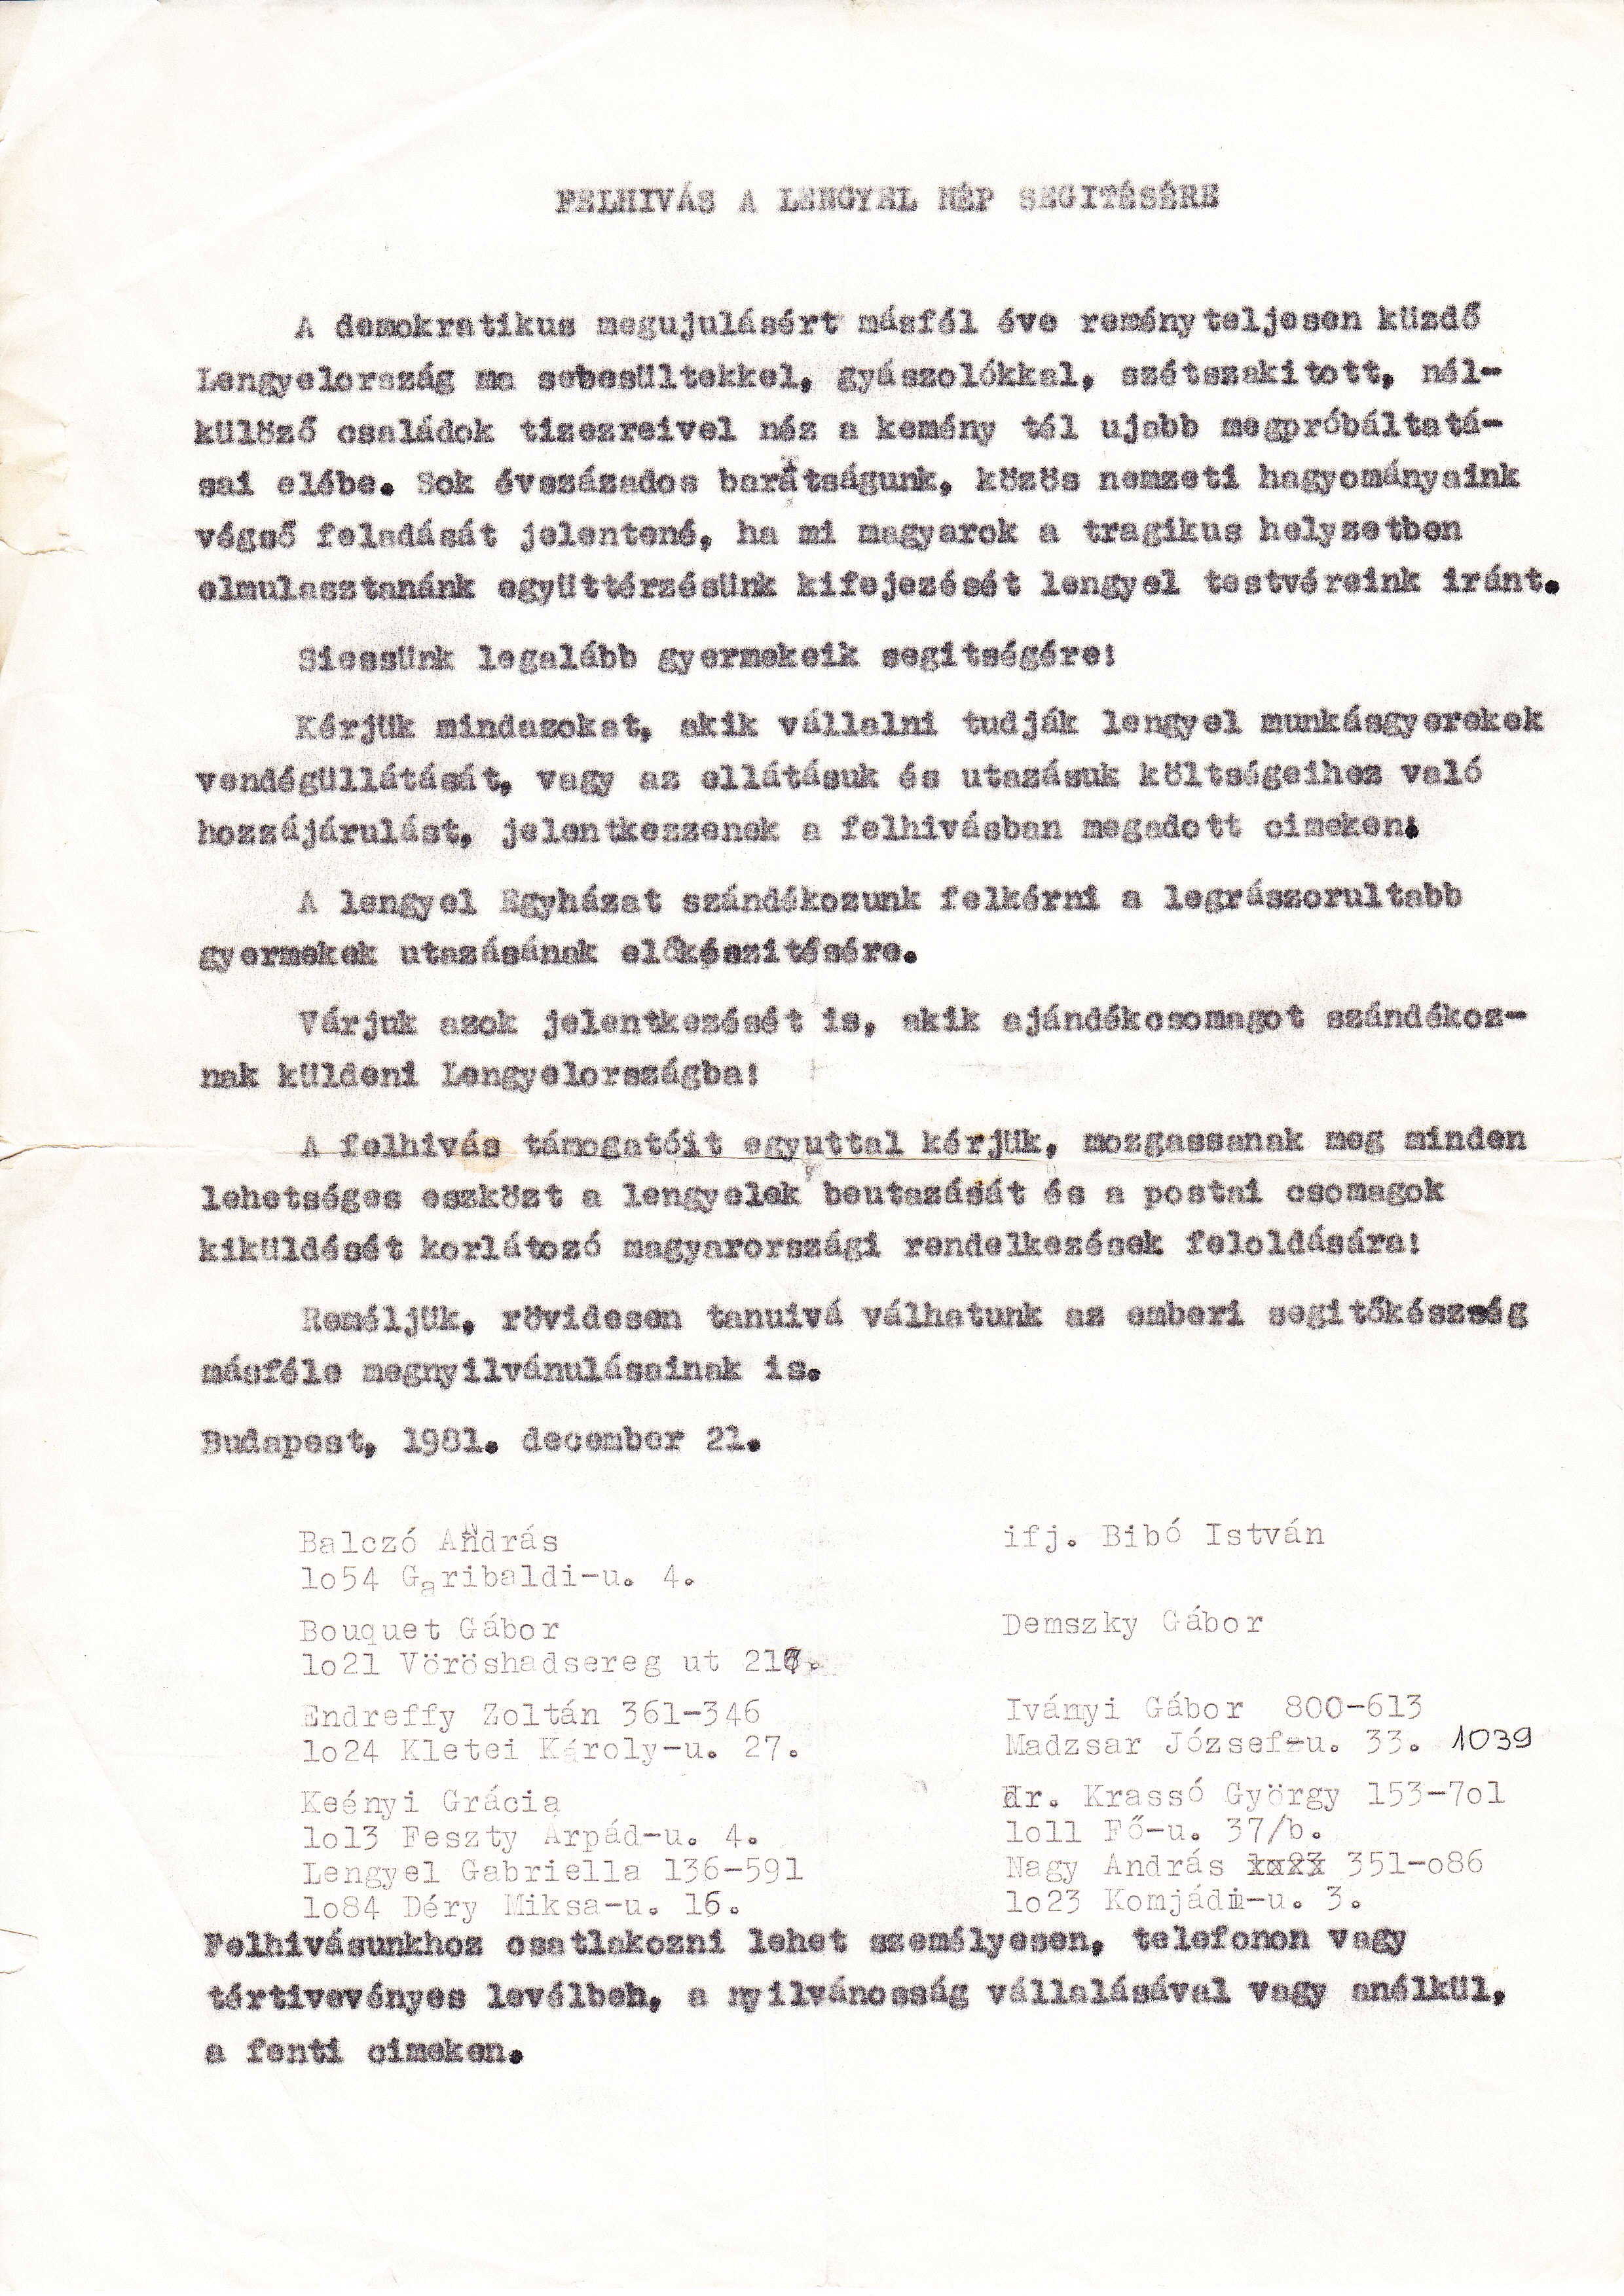 SZETA's call for supporting the poor, Hungary 1980.